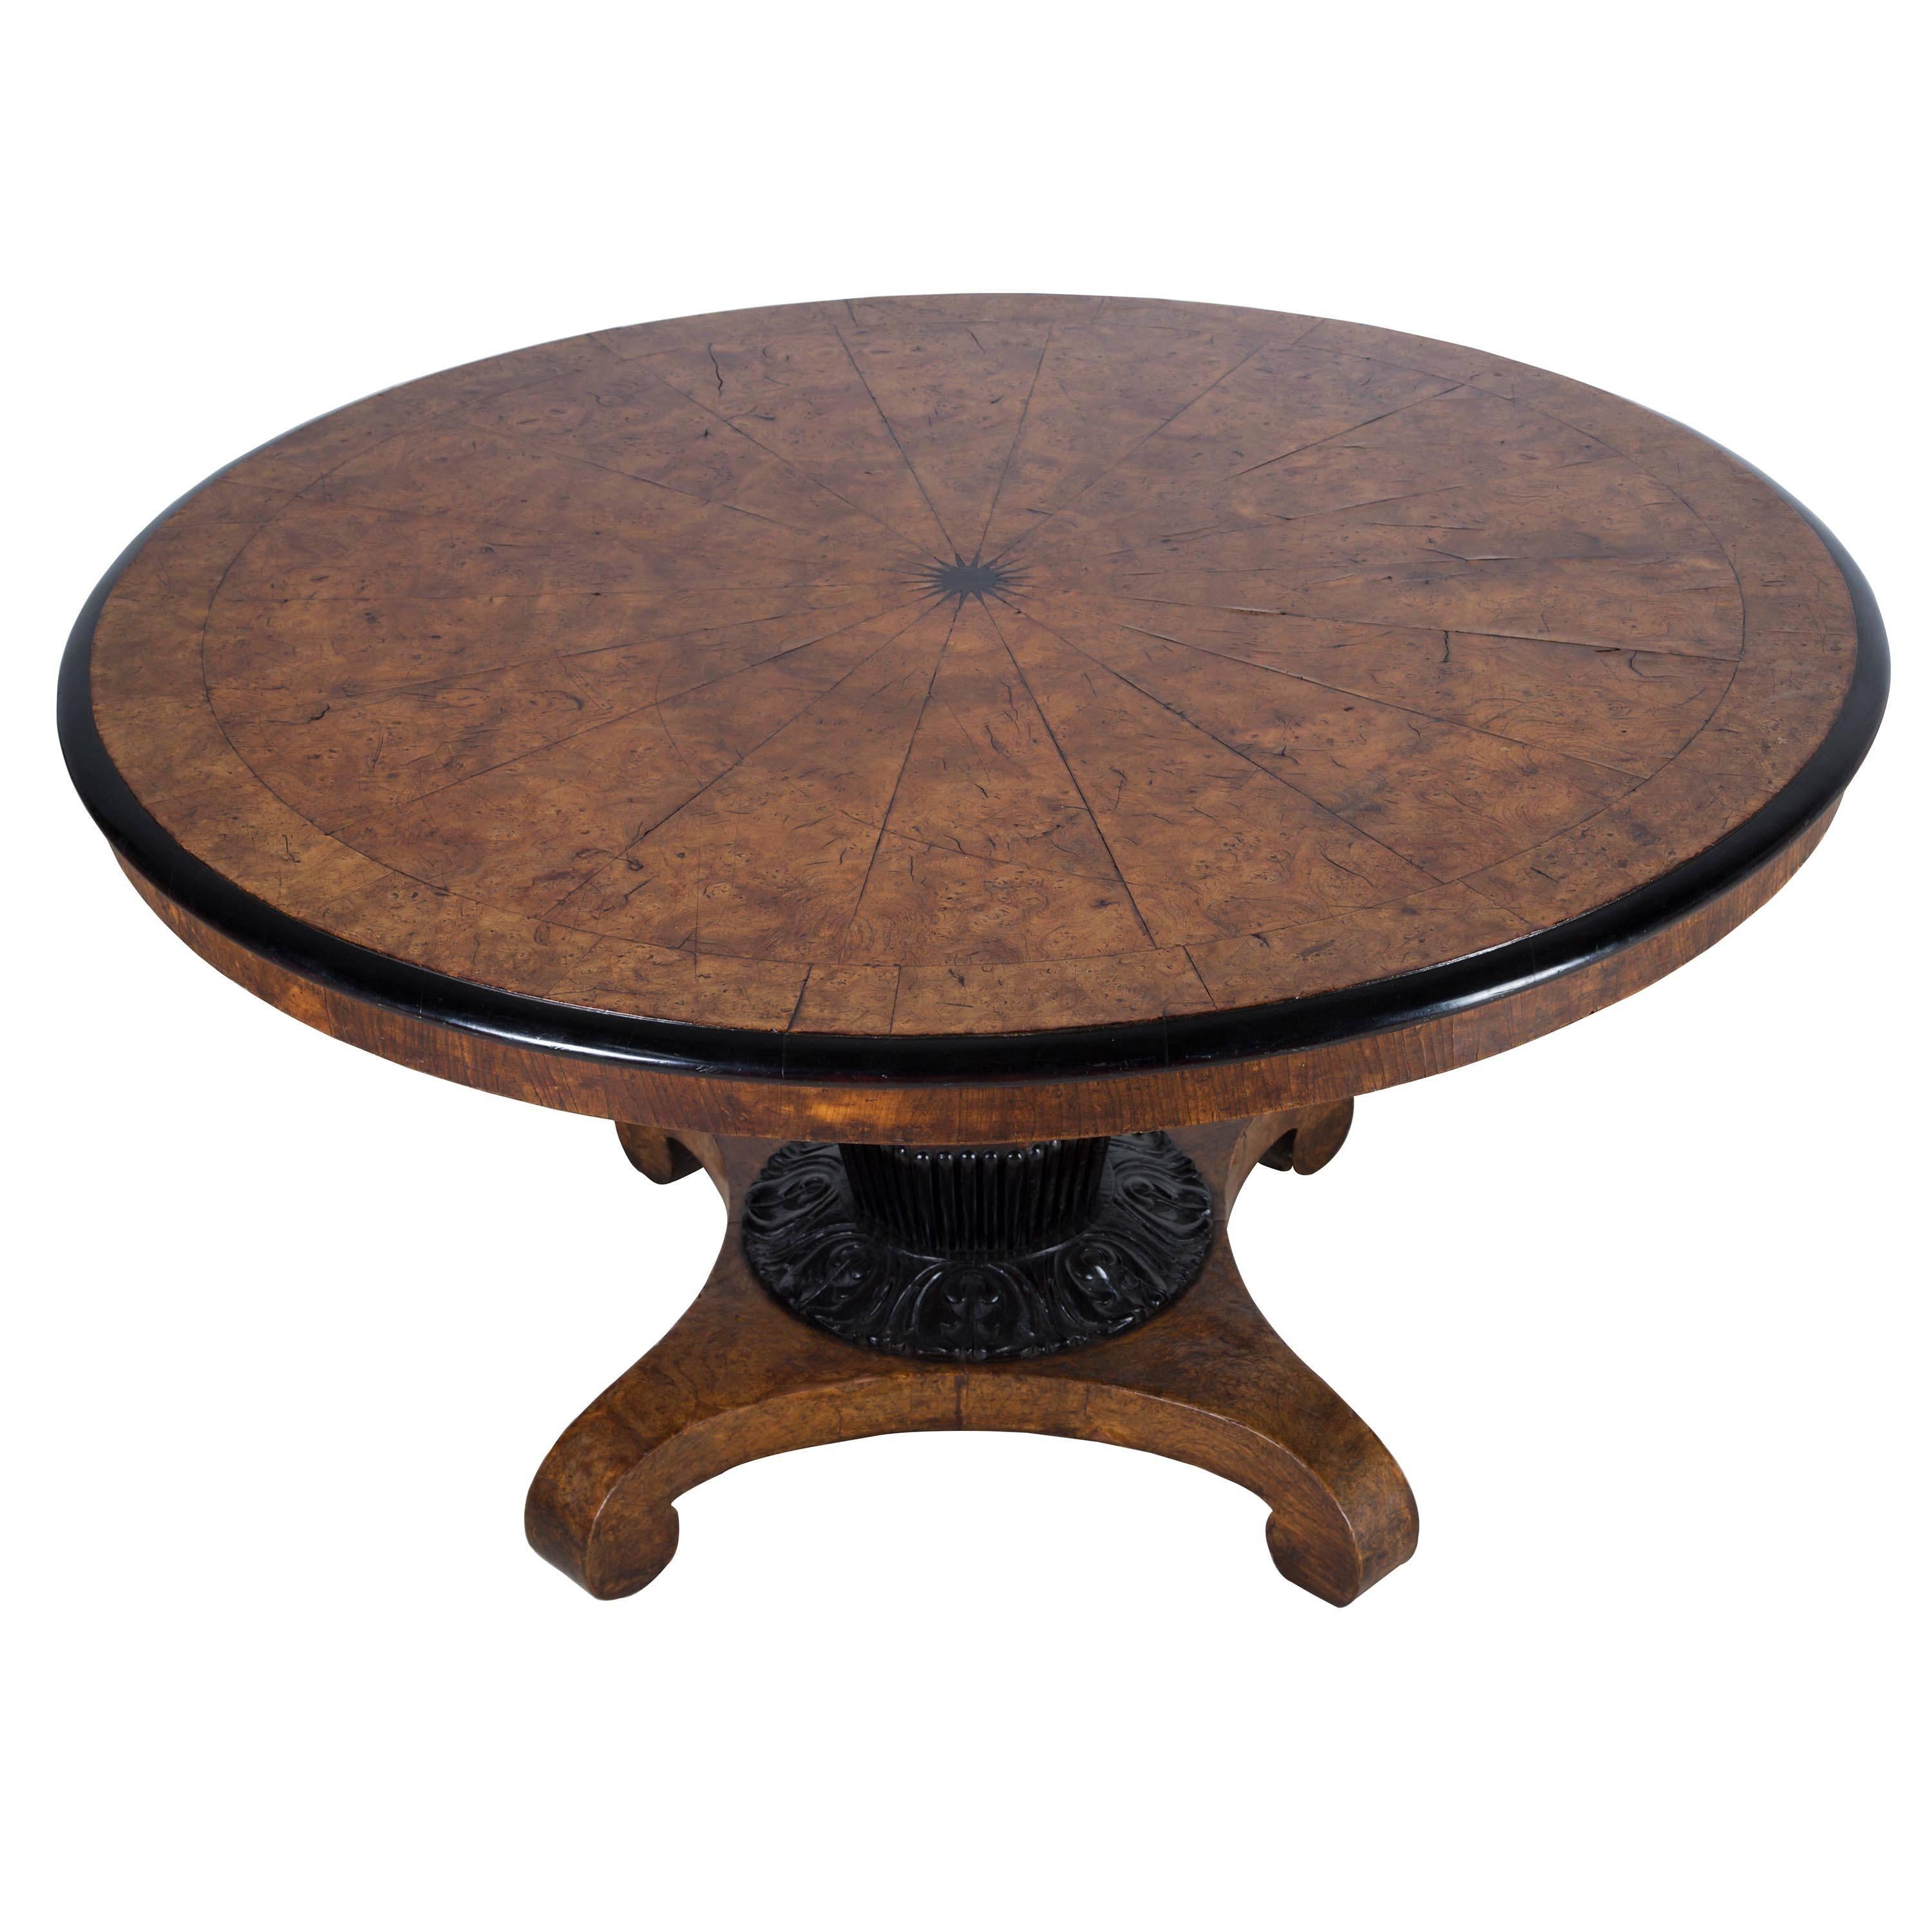 A 19th century burr elm and ebony centre table, the top centre inlaid with an 18 point ebony star surrounded by 18 segments of matching burr elm and then banded in burr elm, the whole top surrounded by an ebonized moulding, the top standing on an